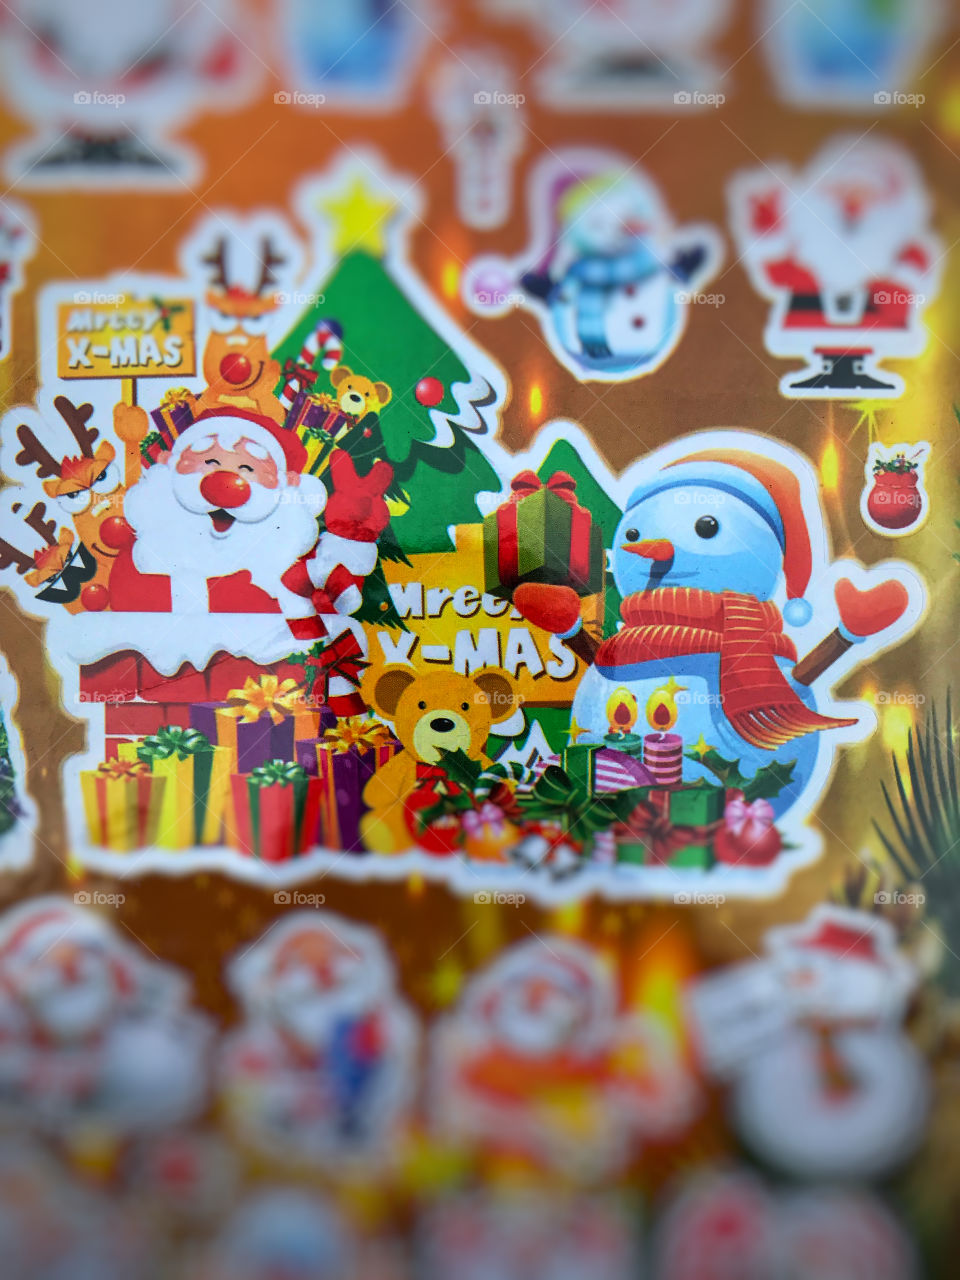 Stickers of Santa clause 